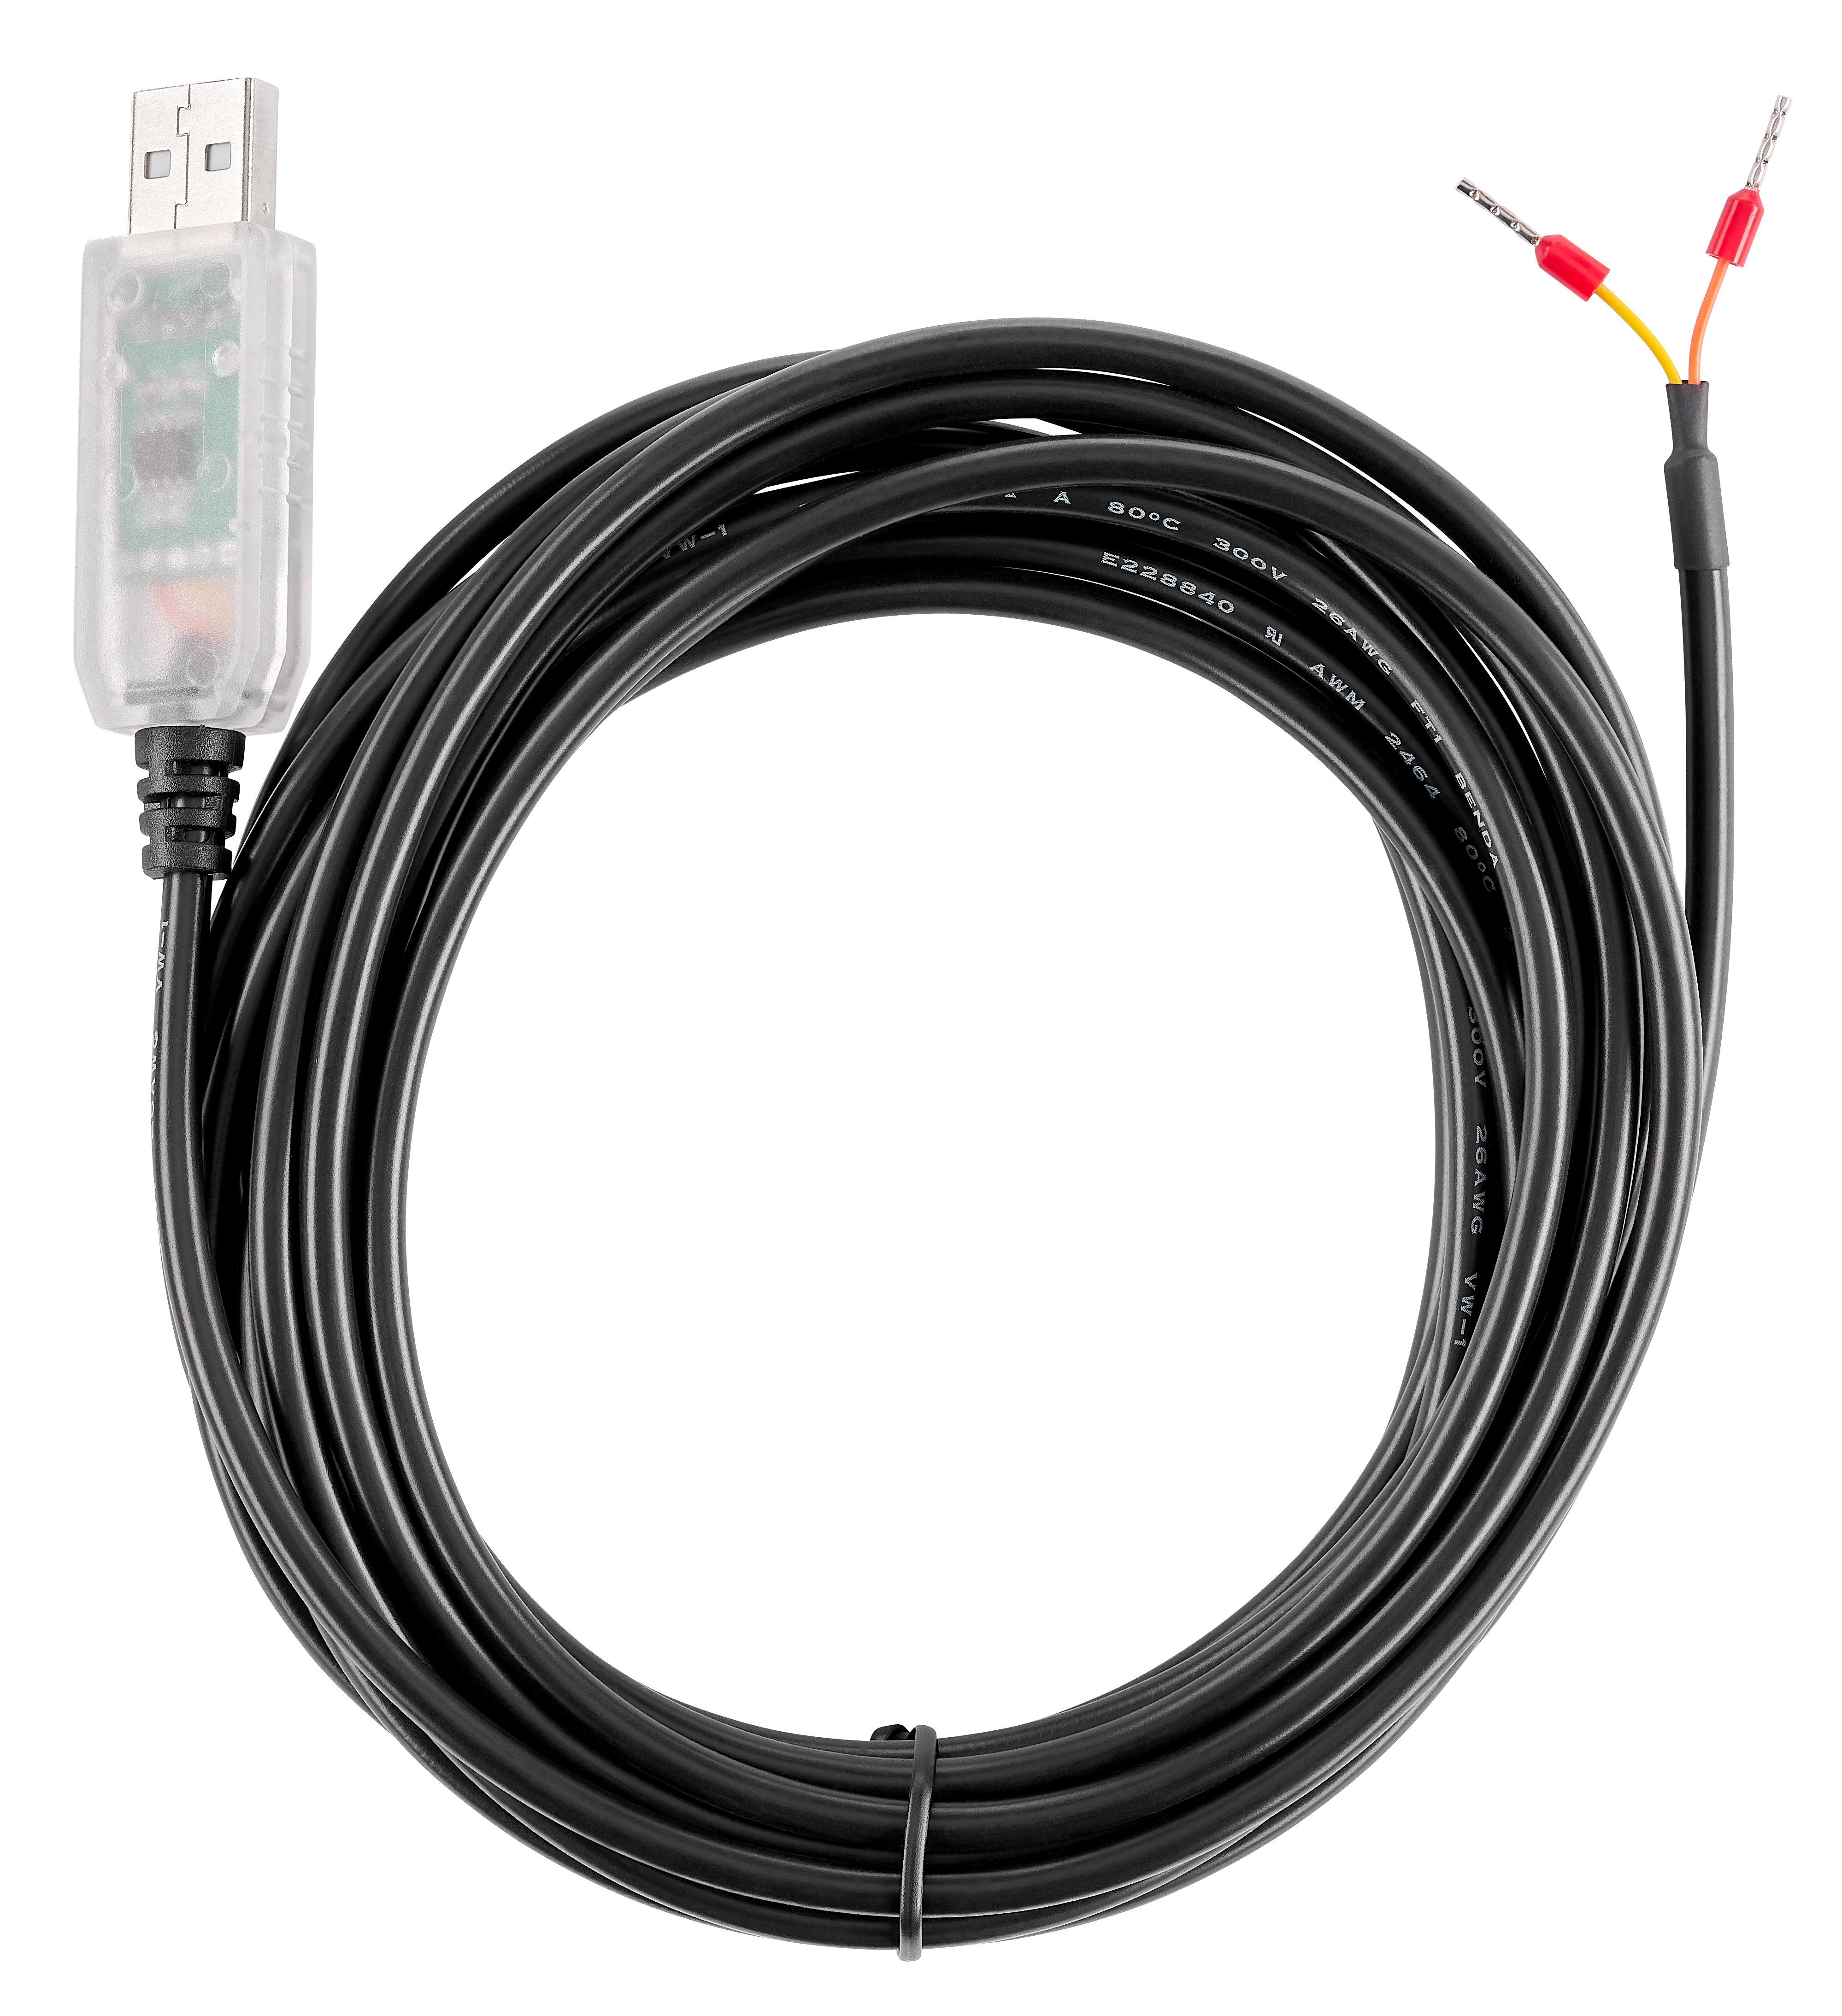 i-CHARGE CONNECT Modul mit 10 m USB-RS485 Kabel